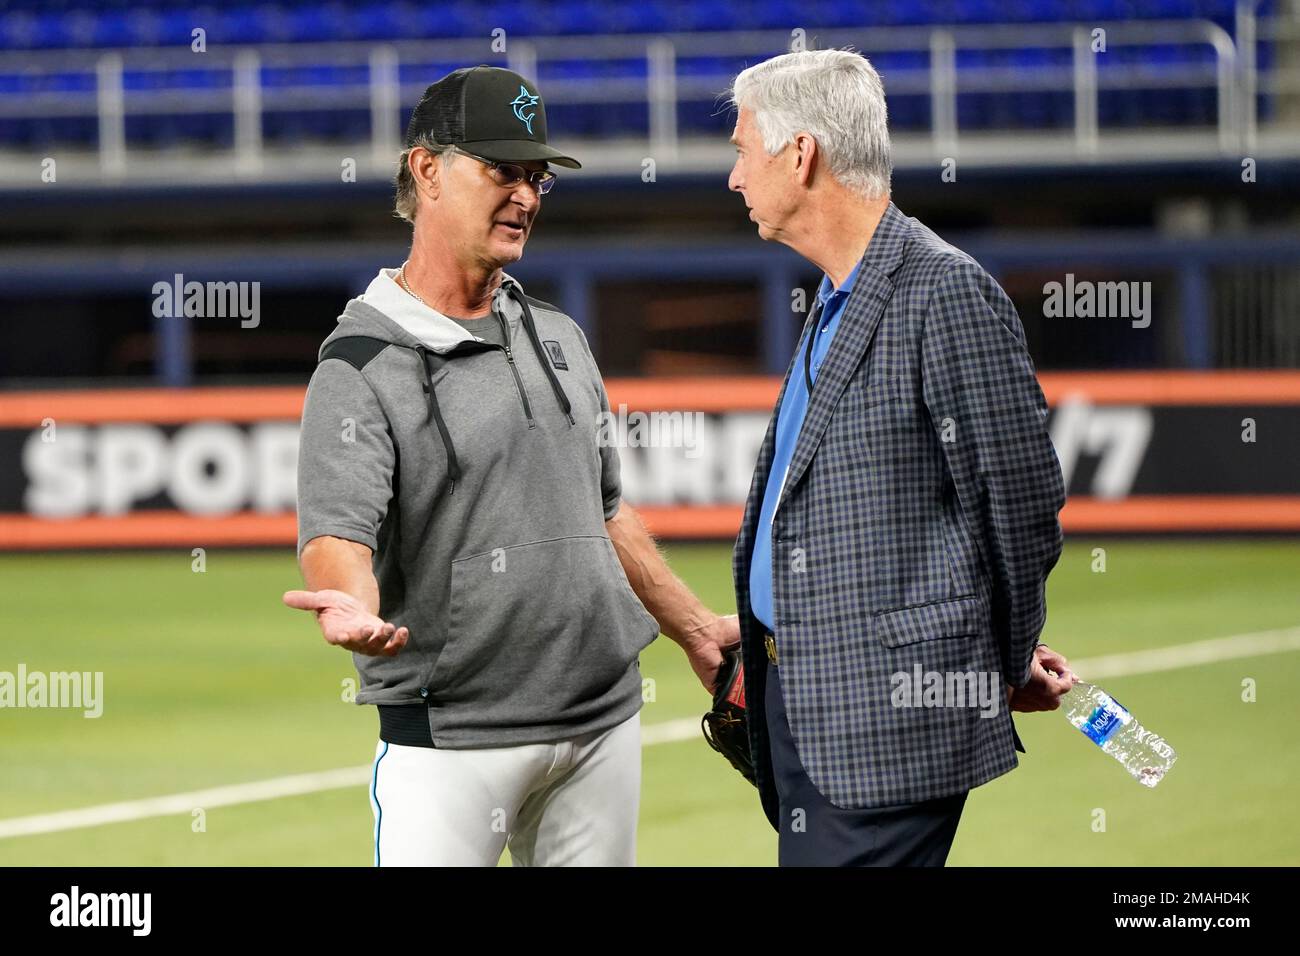 Don Mattingly on not returning to the Marlins, 09/25/2022